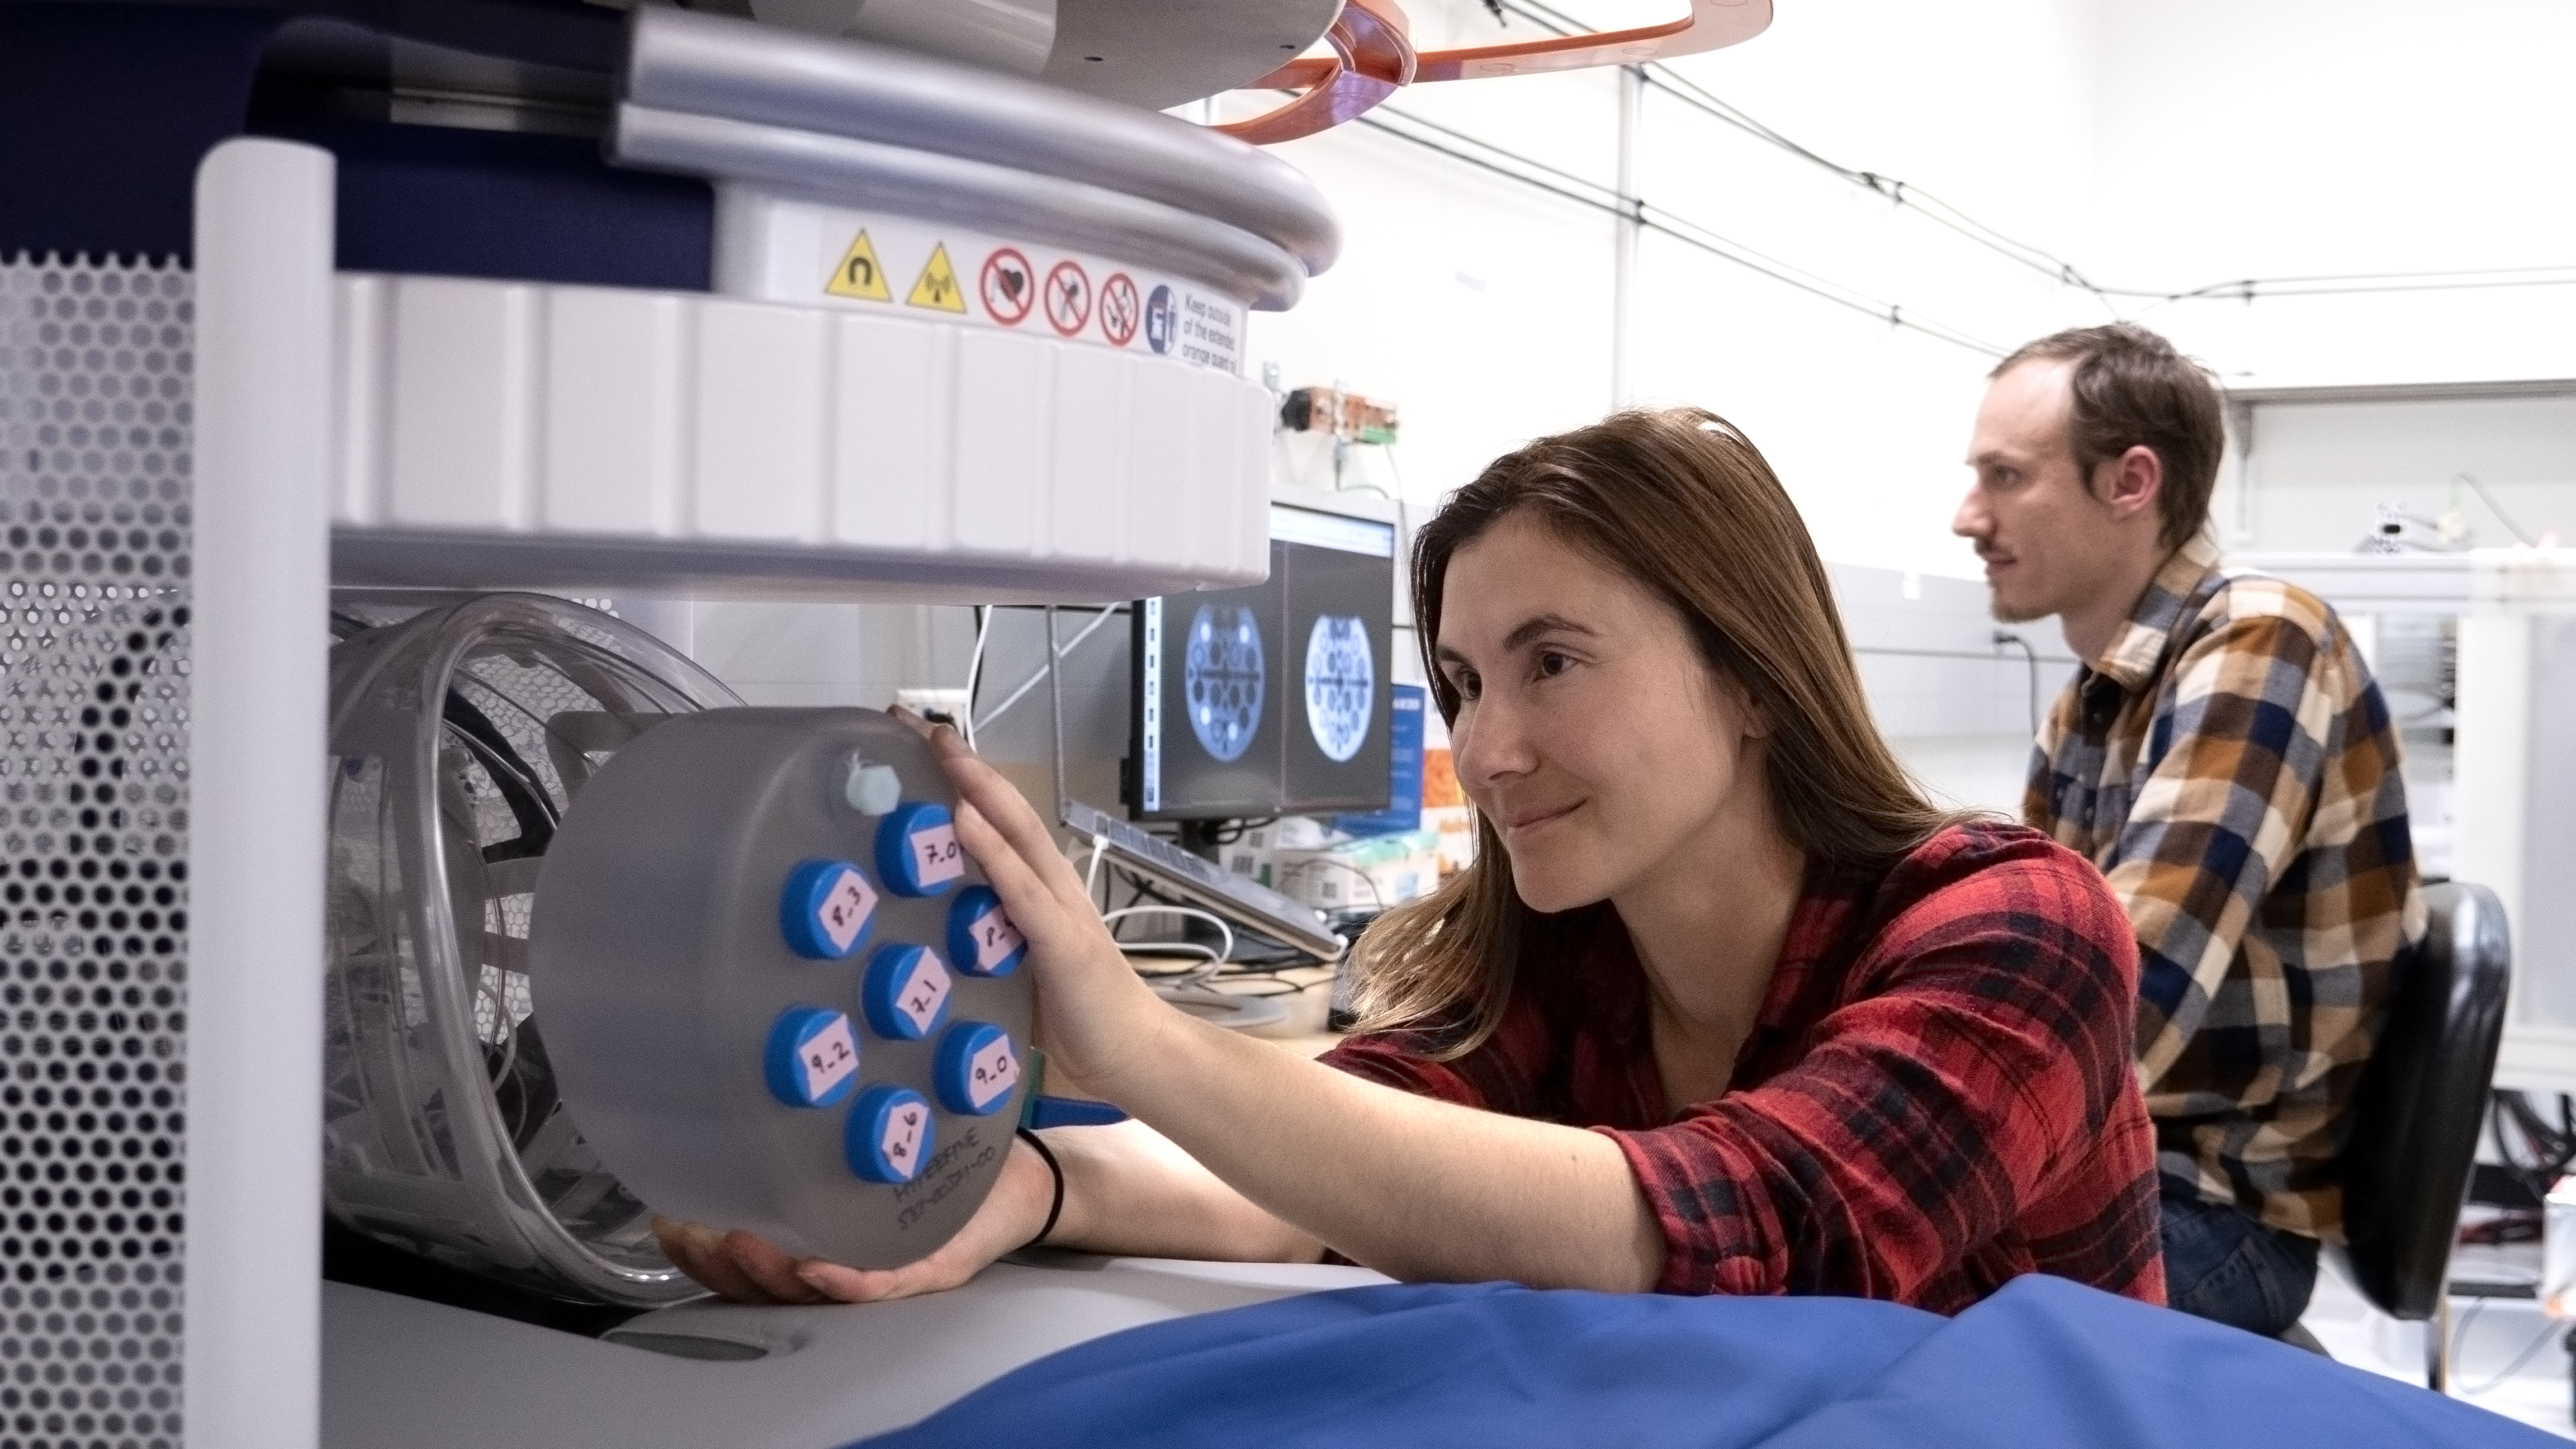 New NIST Measurements Aim to Advance and Validate Portable MRI Technology